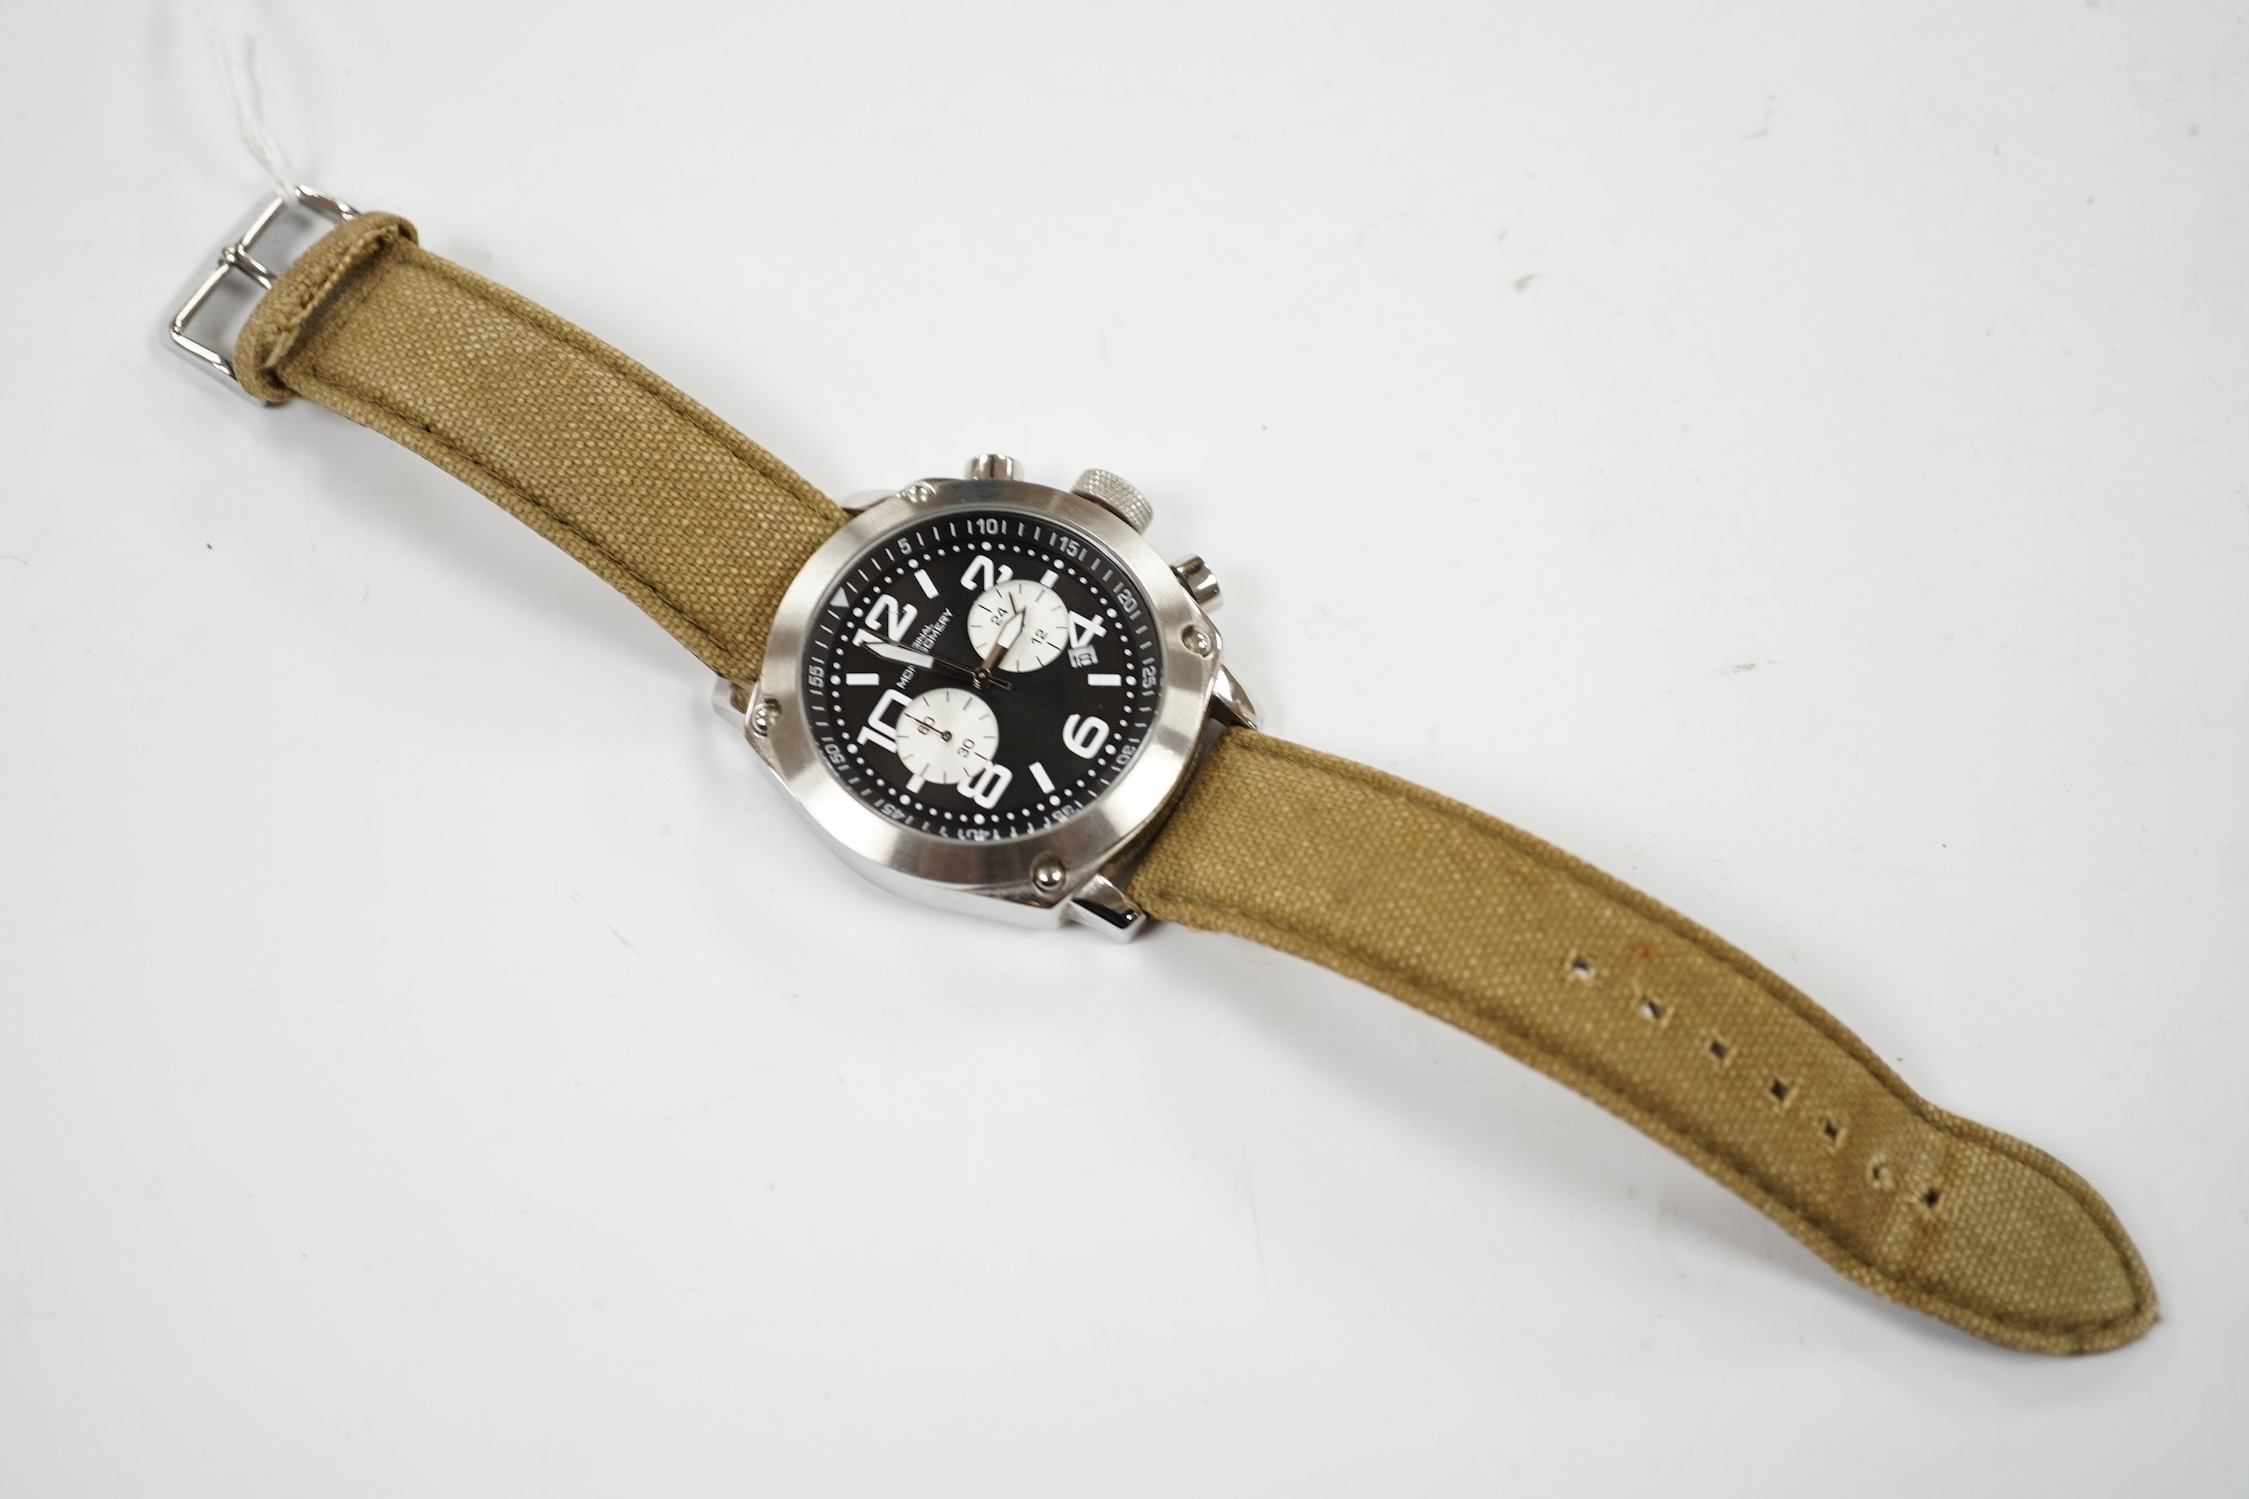 A gentleman's modern stainless steel 'Original Montgomery' chronograph quartz wrist watch, on a fabric and leather strap, design based on a model used by the British Army during WWII.